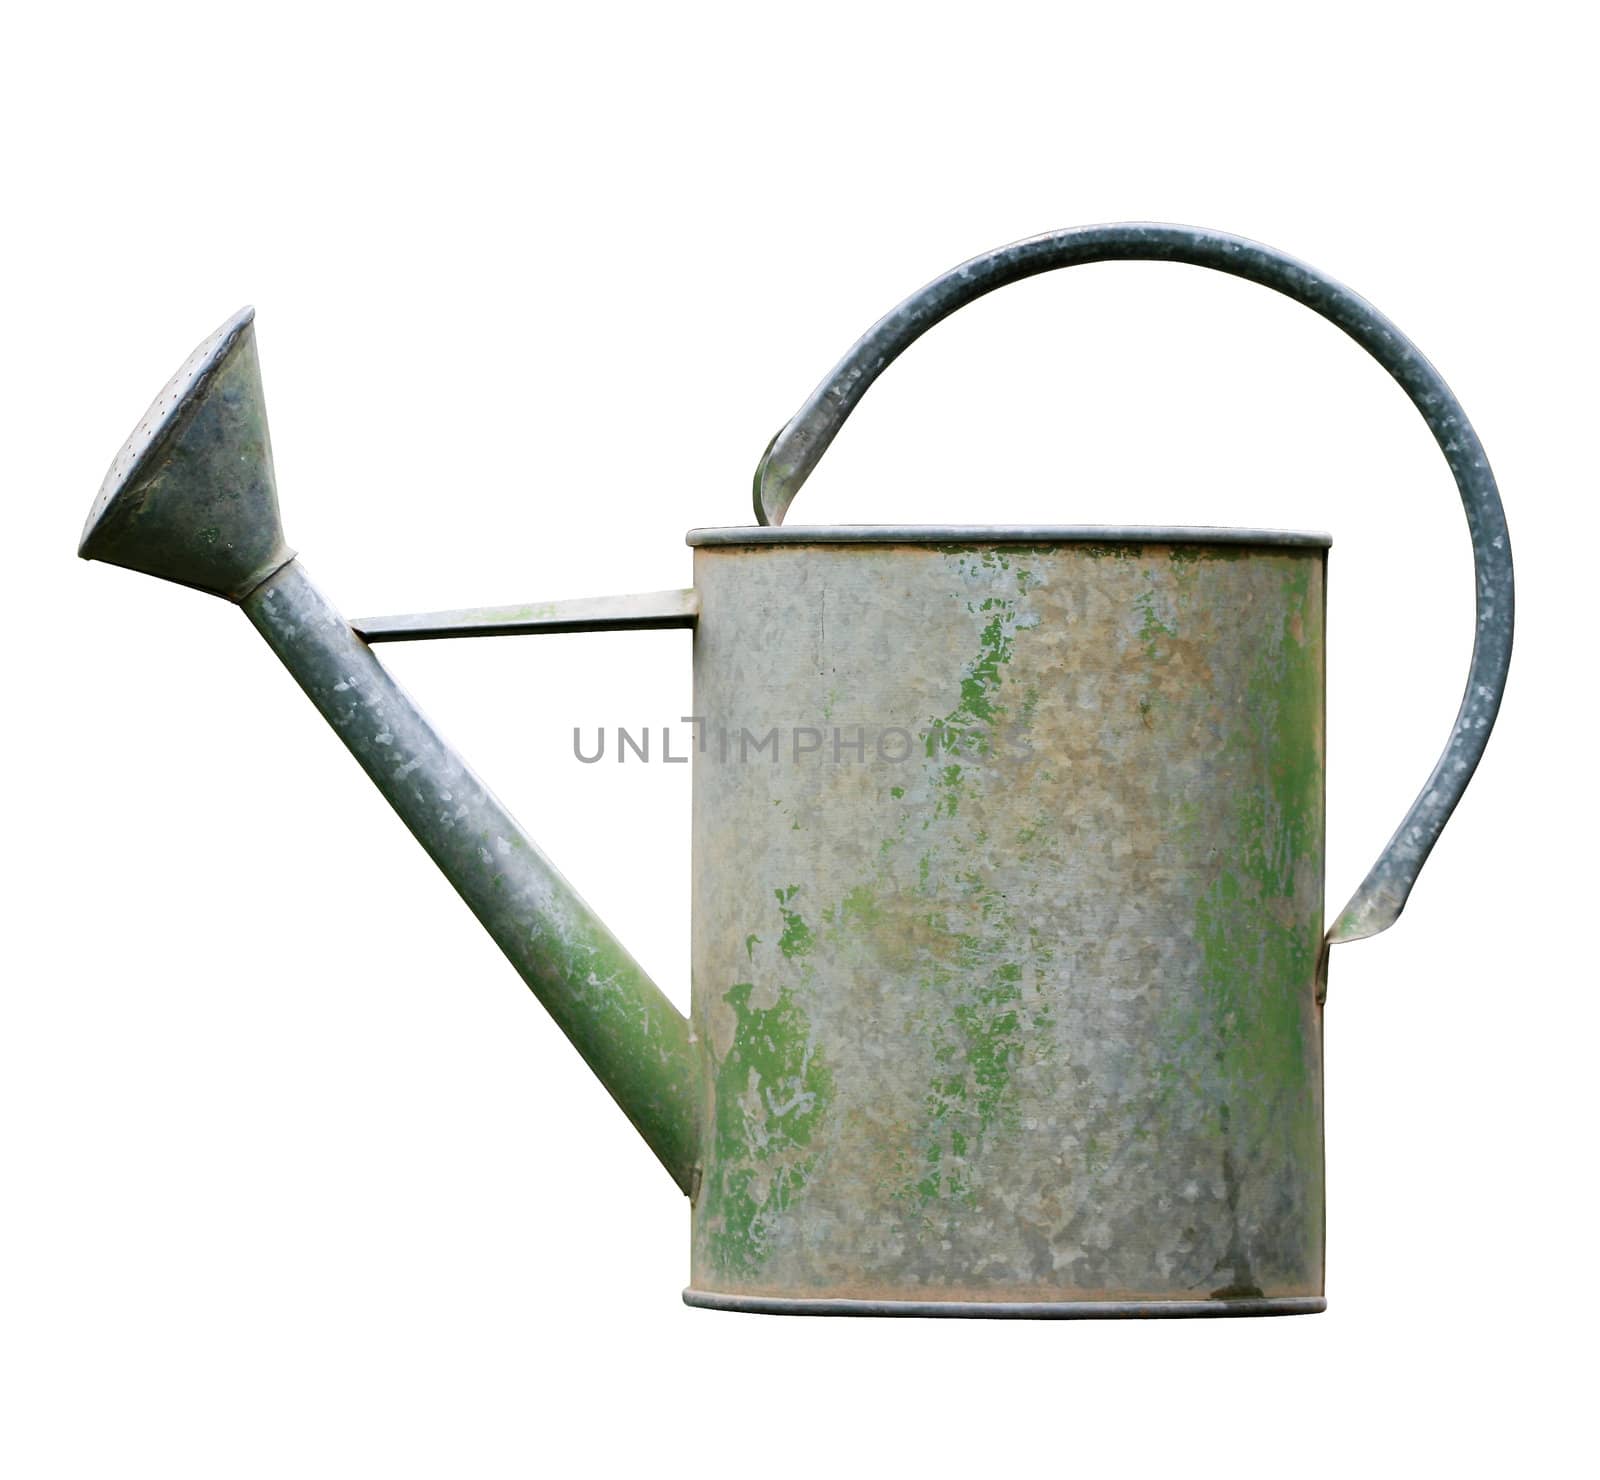 Aged metalic watering can isolated on white background. Clipping path included to replace background.